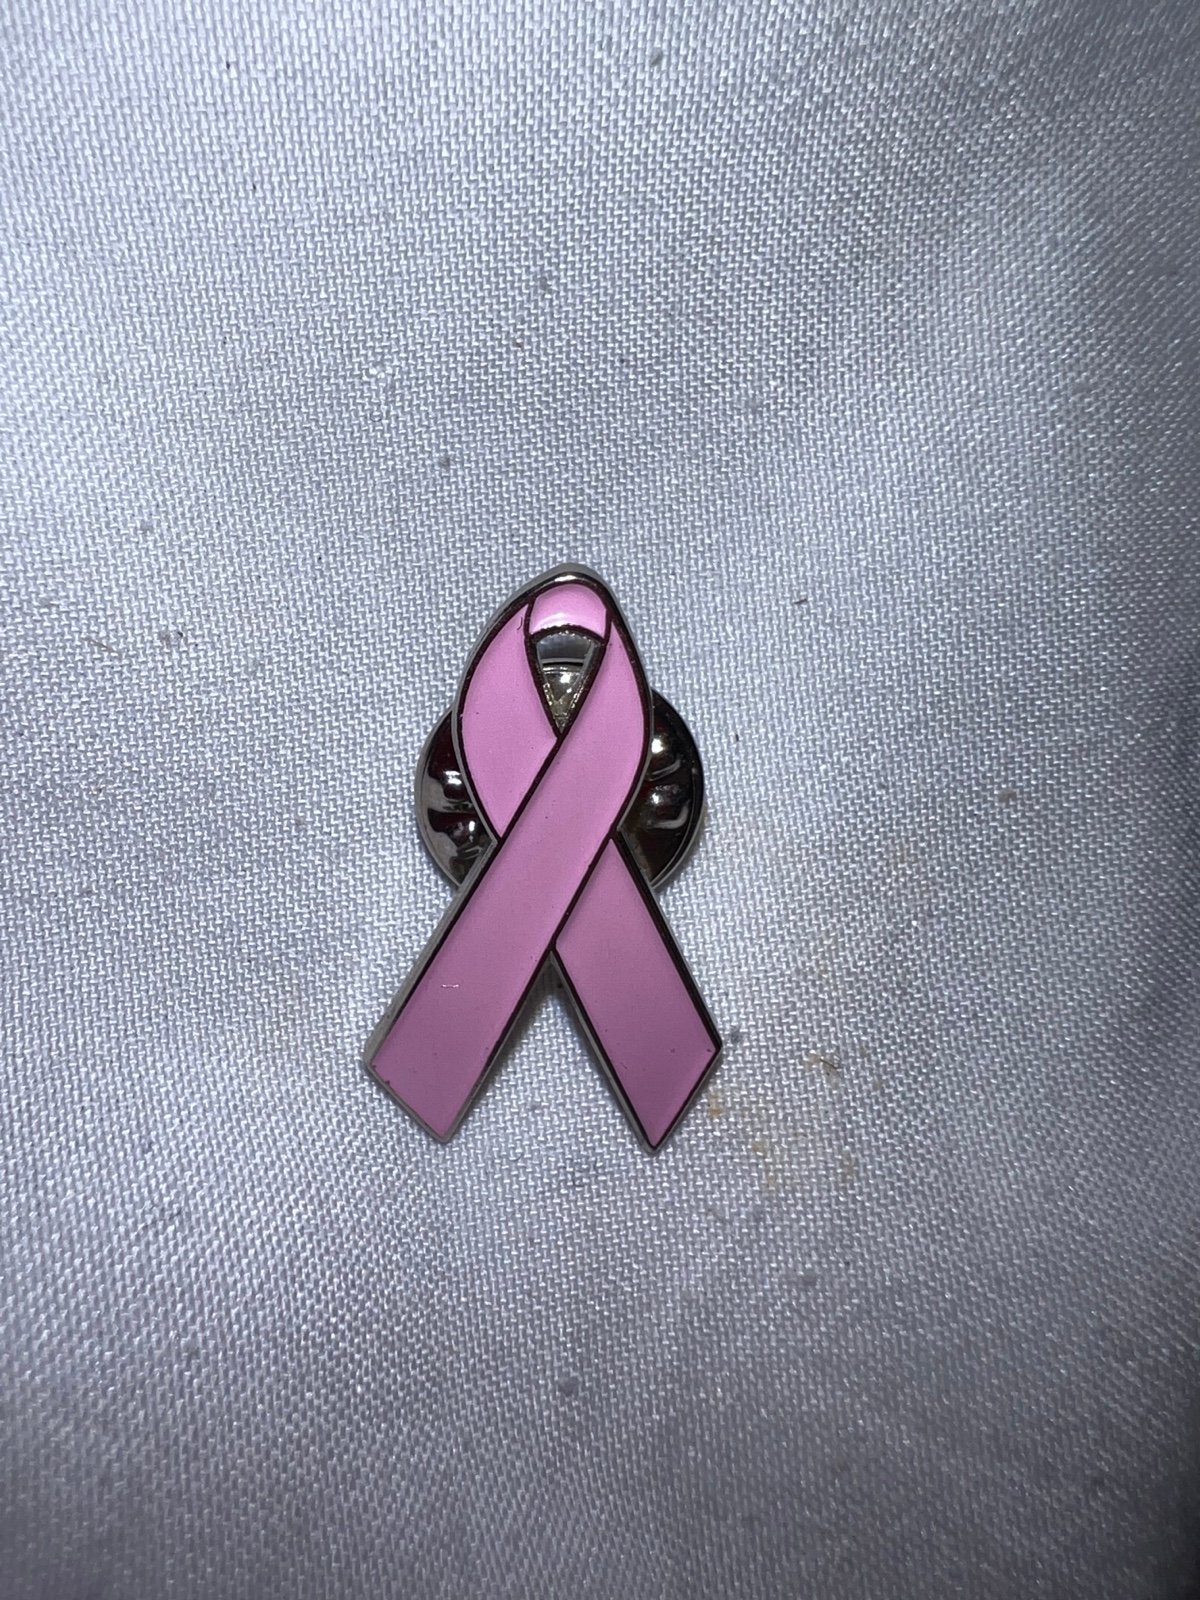 Custom Pink Breast Cancer Awareness Ribbon Lapel Hat Pin Brooch Enamel TL9 hSYkL79A4 Everyday Low Prices